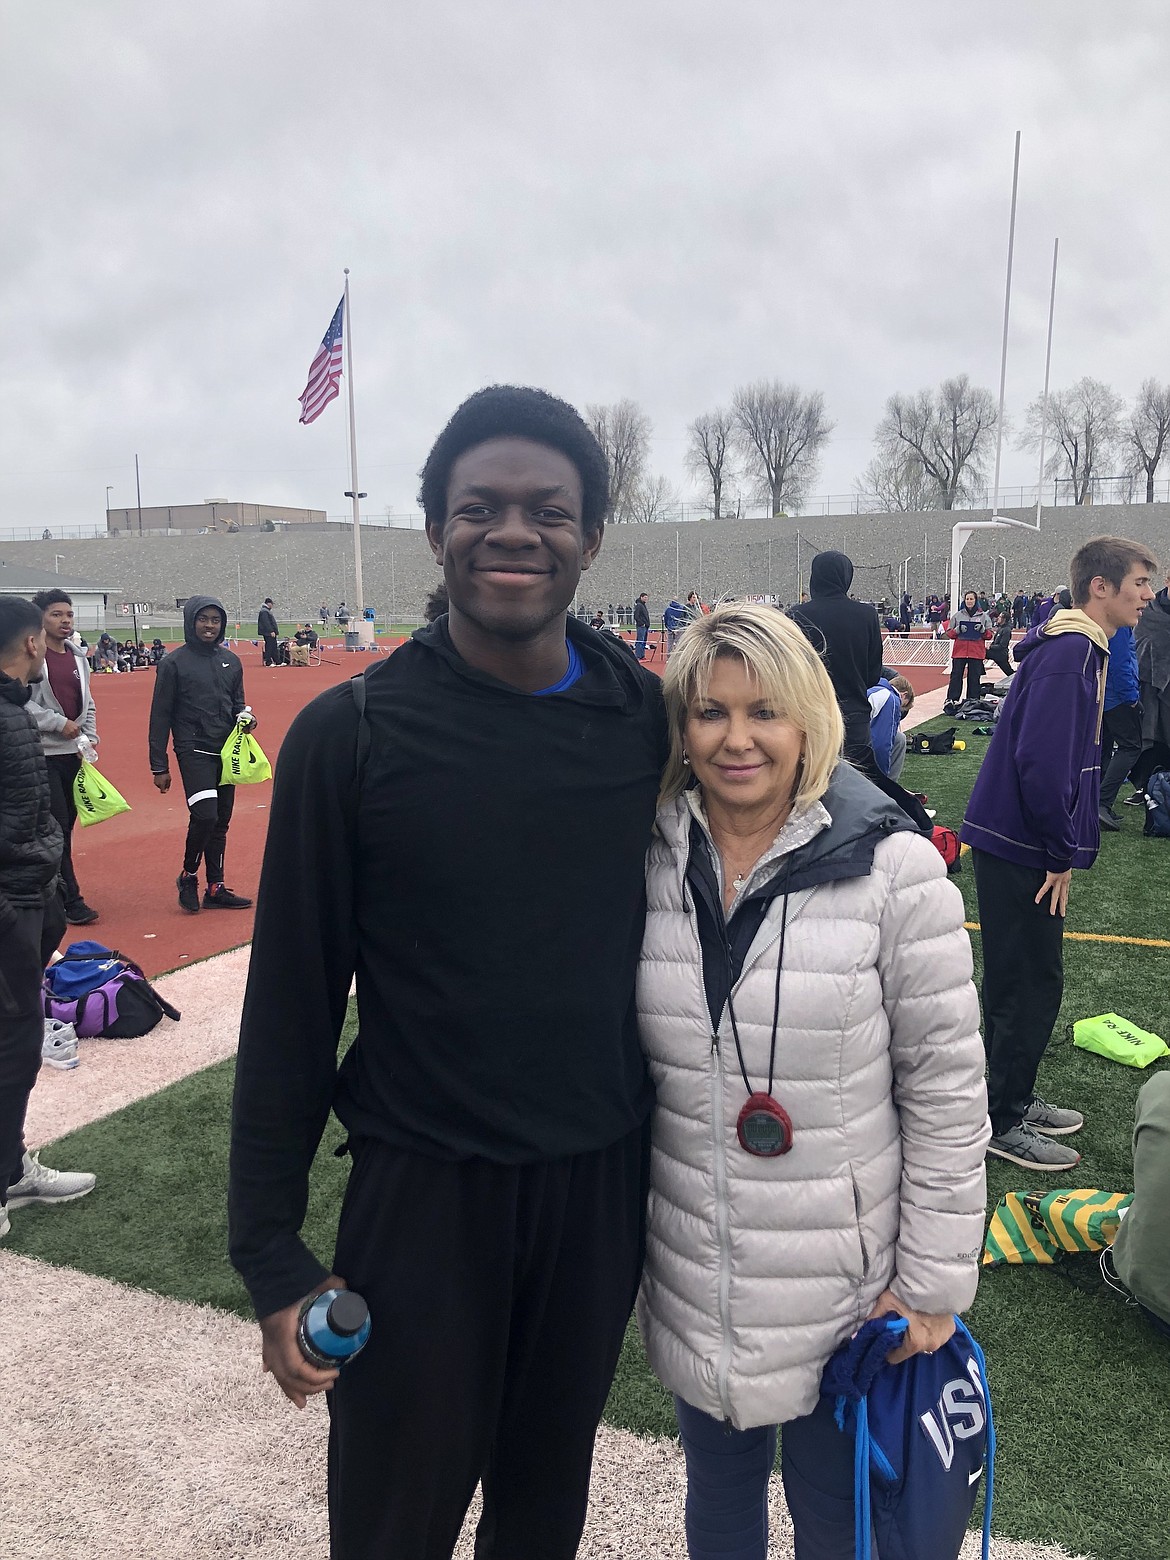 Courtesy photo
Coeur d&#146;Alene High senior Nate Burch and assistant coach Linda Lanker after Burch won the 110-meter hurdles at the Pasco Invitational for the second straight year on Saturday. Burch will continue his track and field career at the Community Colleges of Spokane next year, where Lanker is an assistant coach.